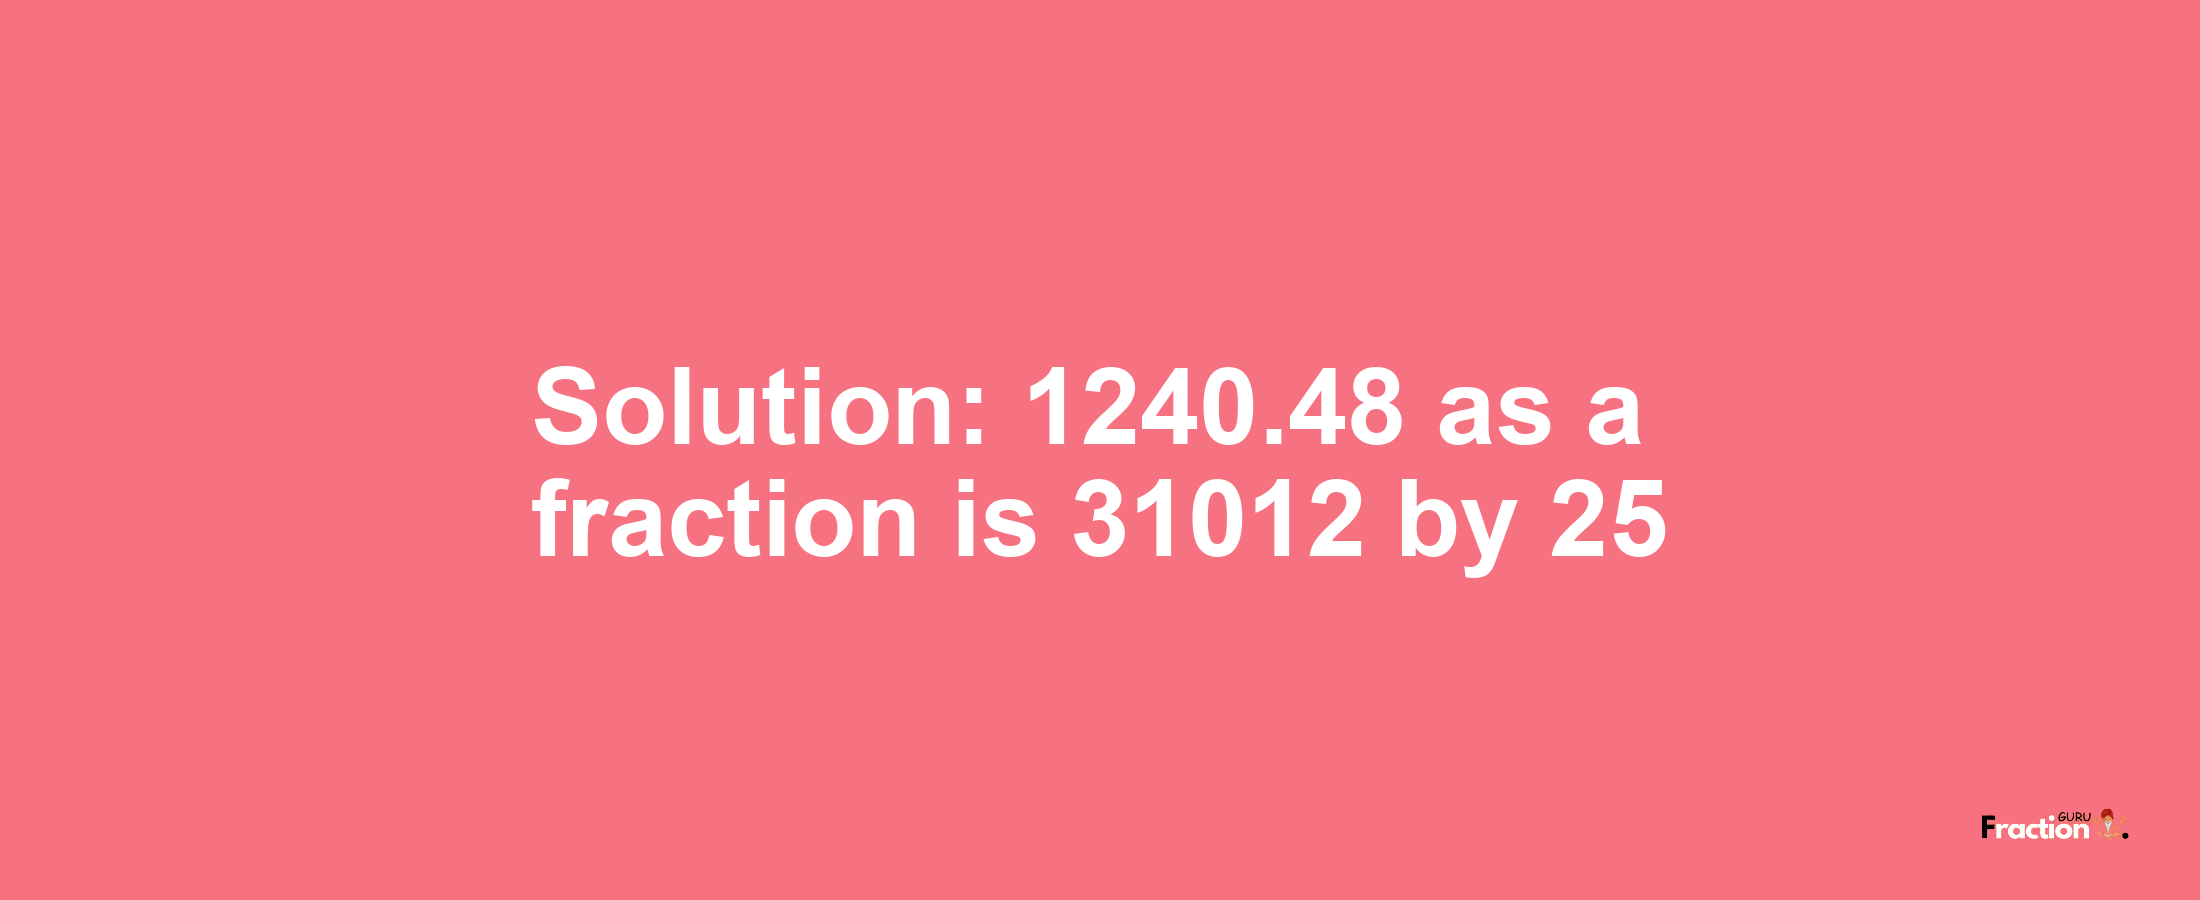 Solution:1240.48 as a fraction is 31012/25